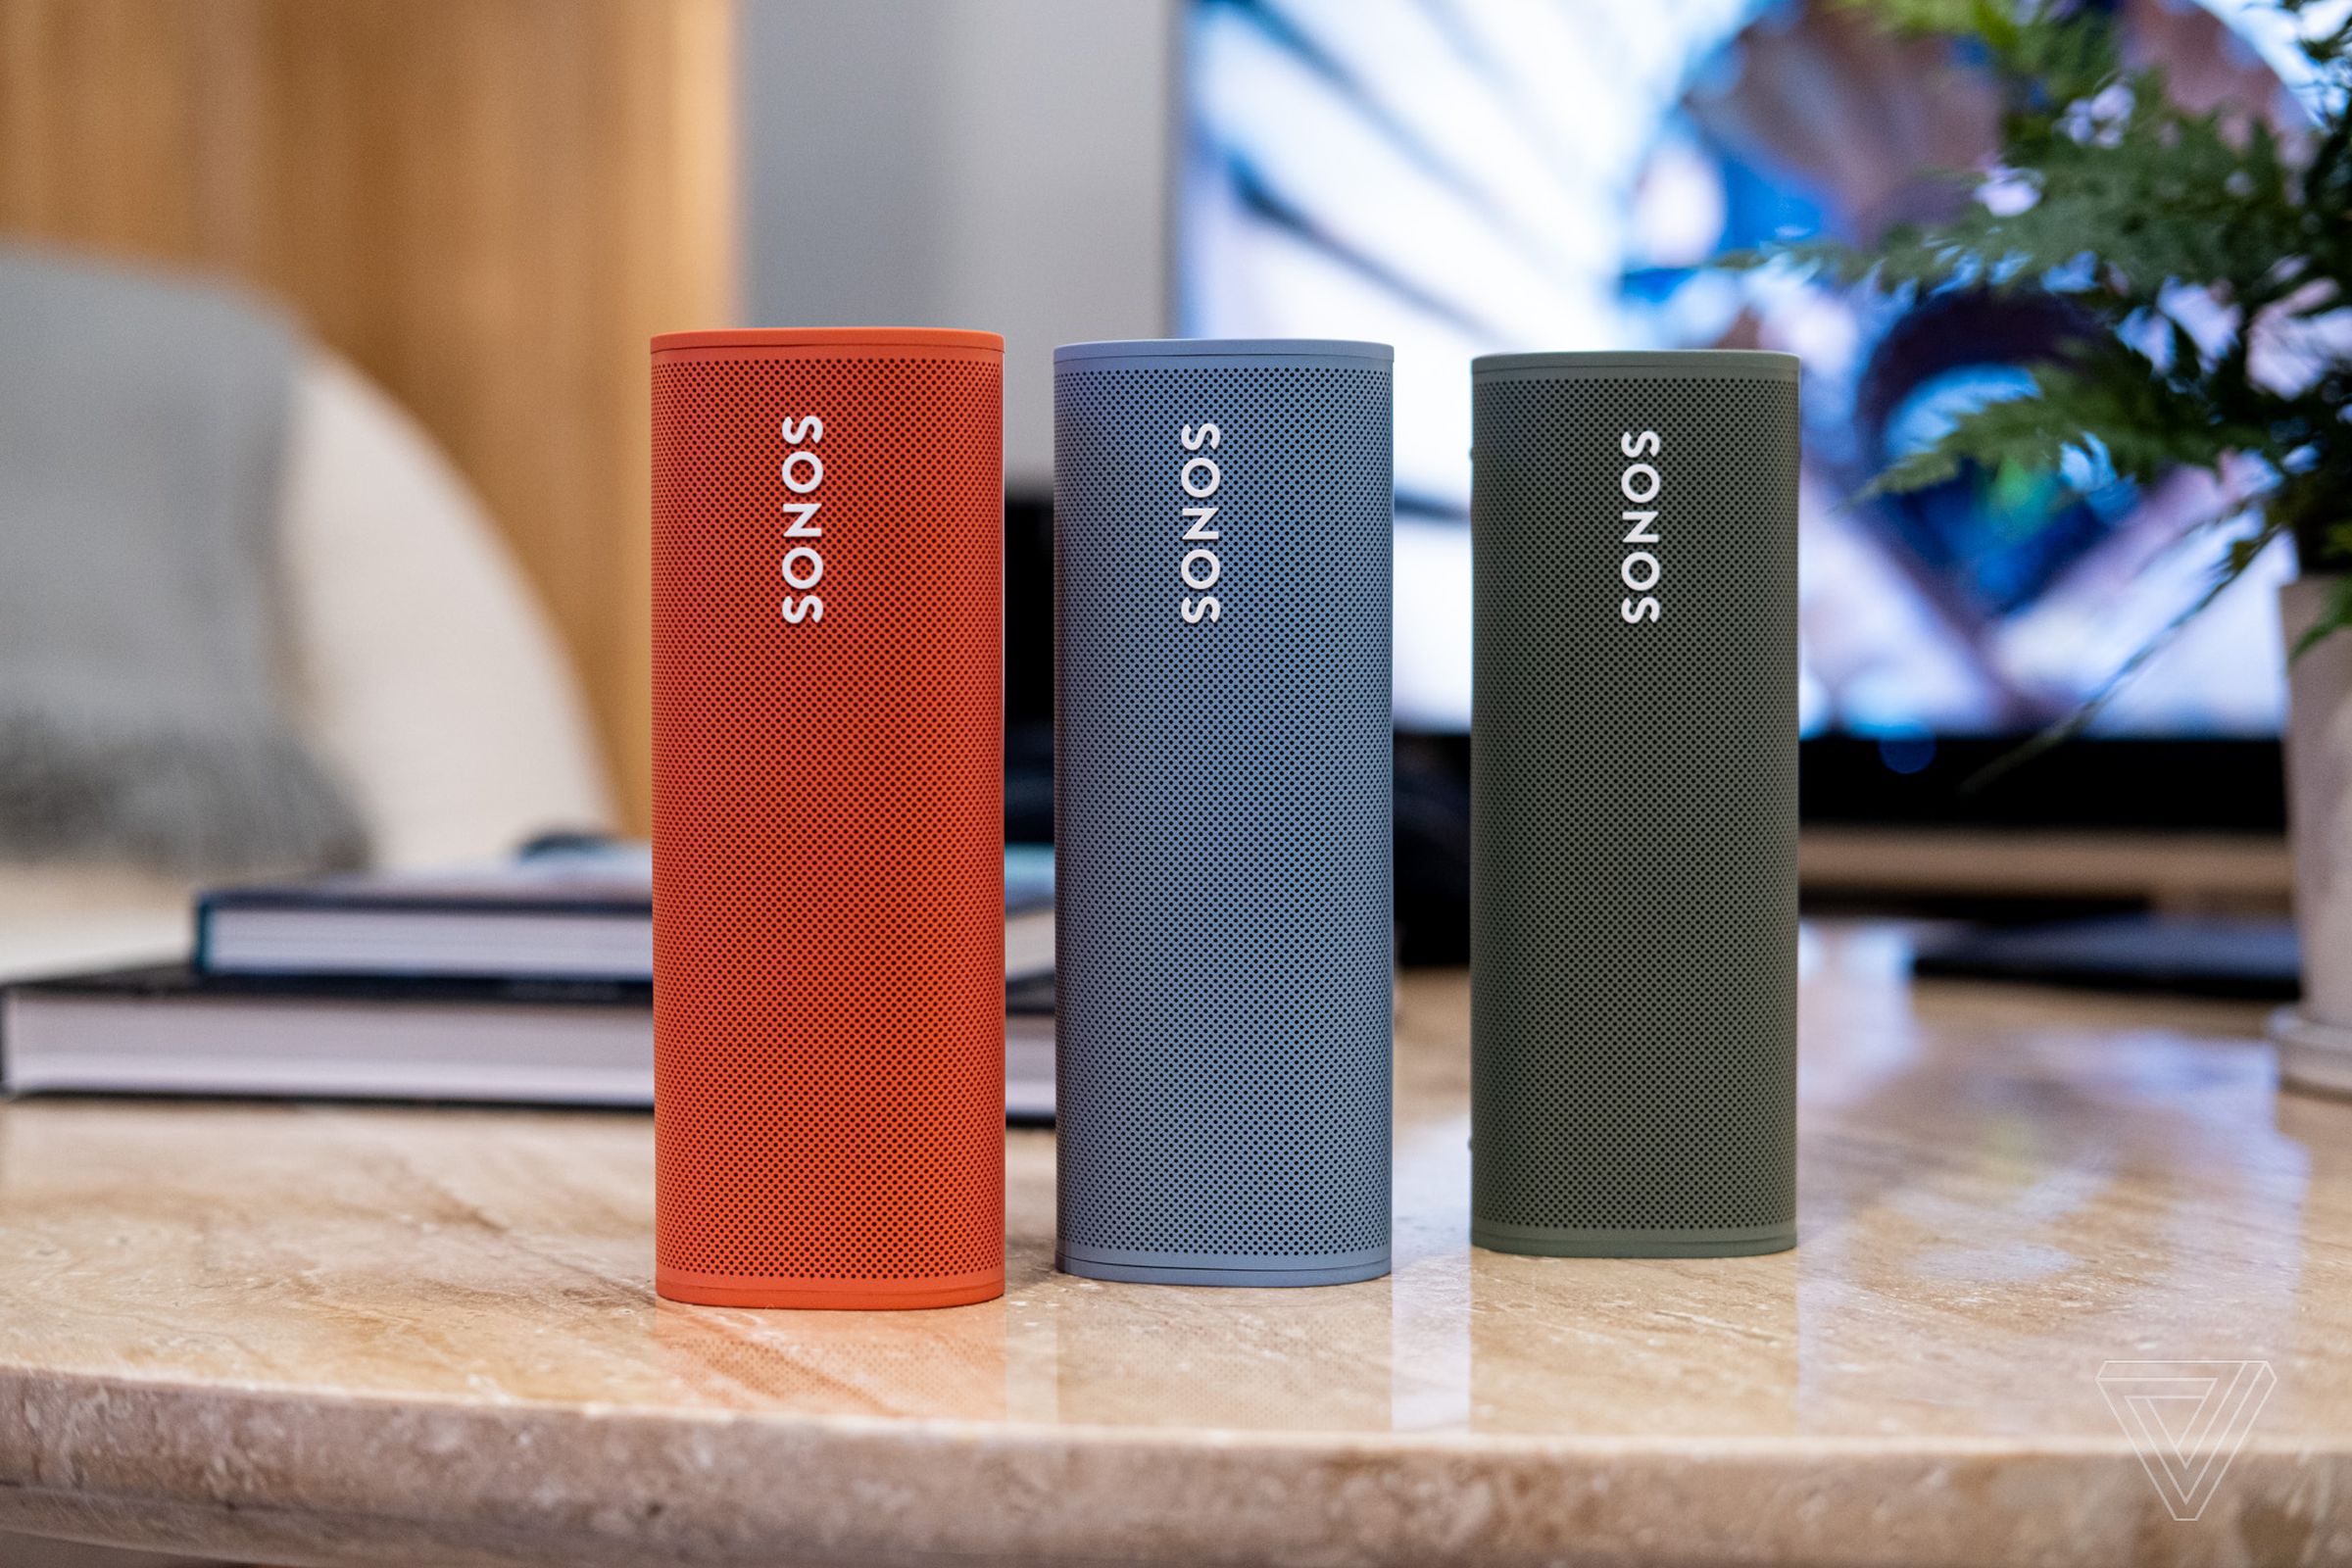 Sonos’ portable Roam speaker now comes in new colors.